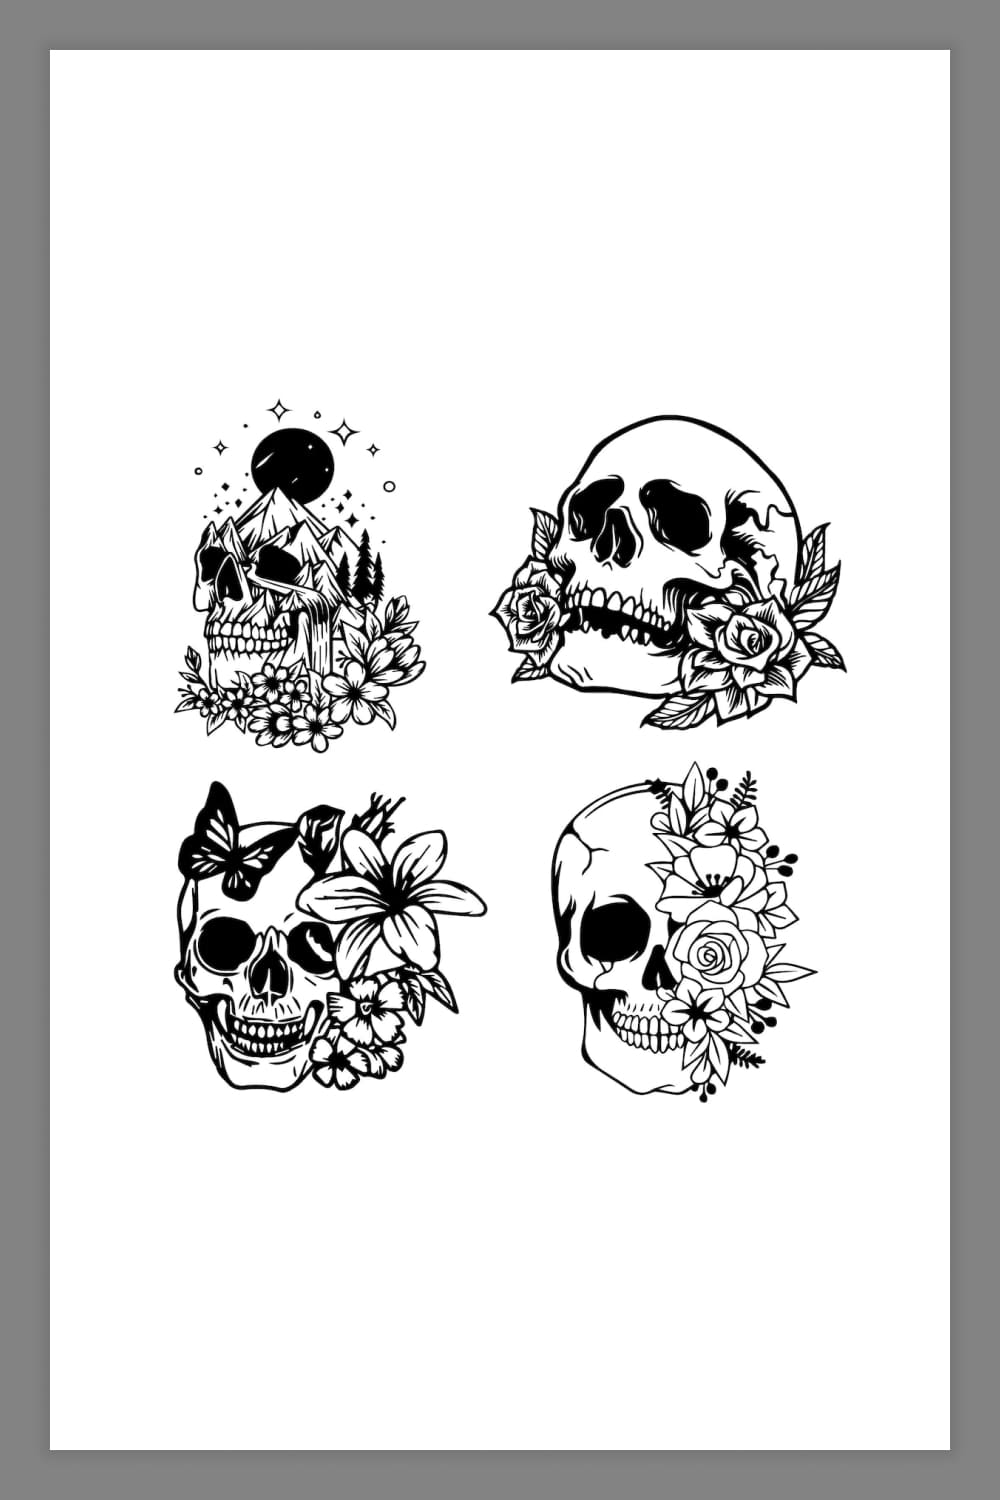 Collage of four images of skulls with bouquets of flowers.